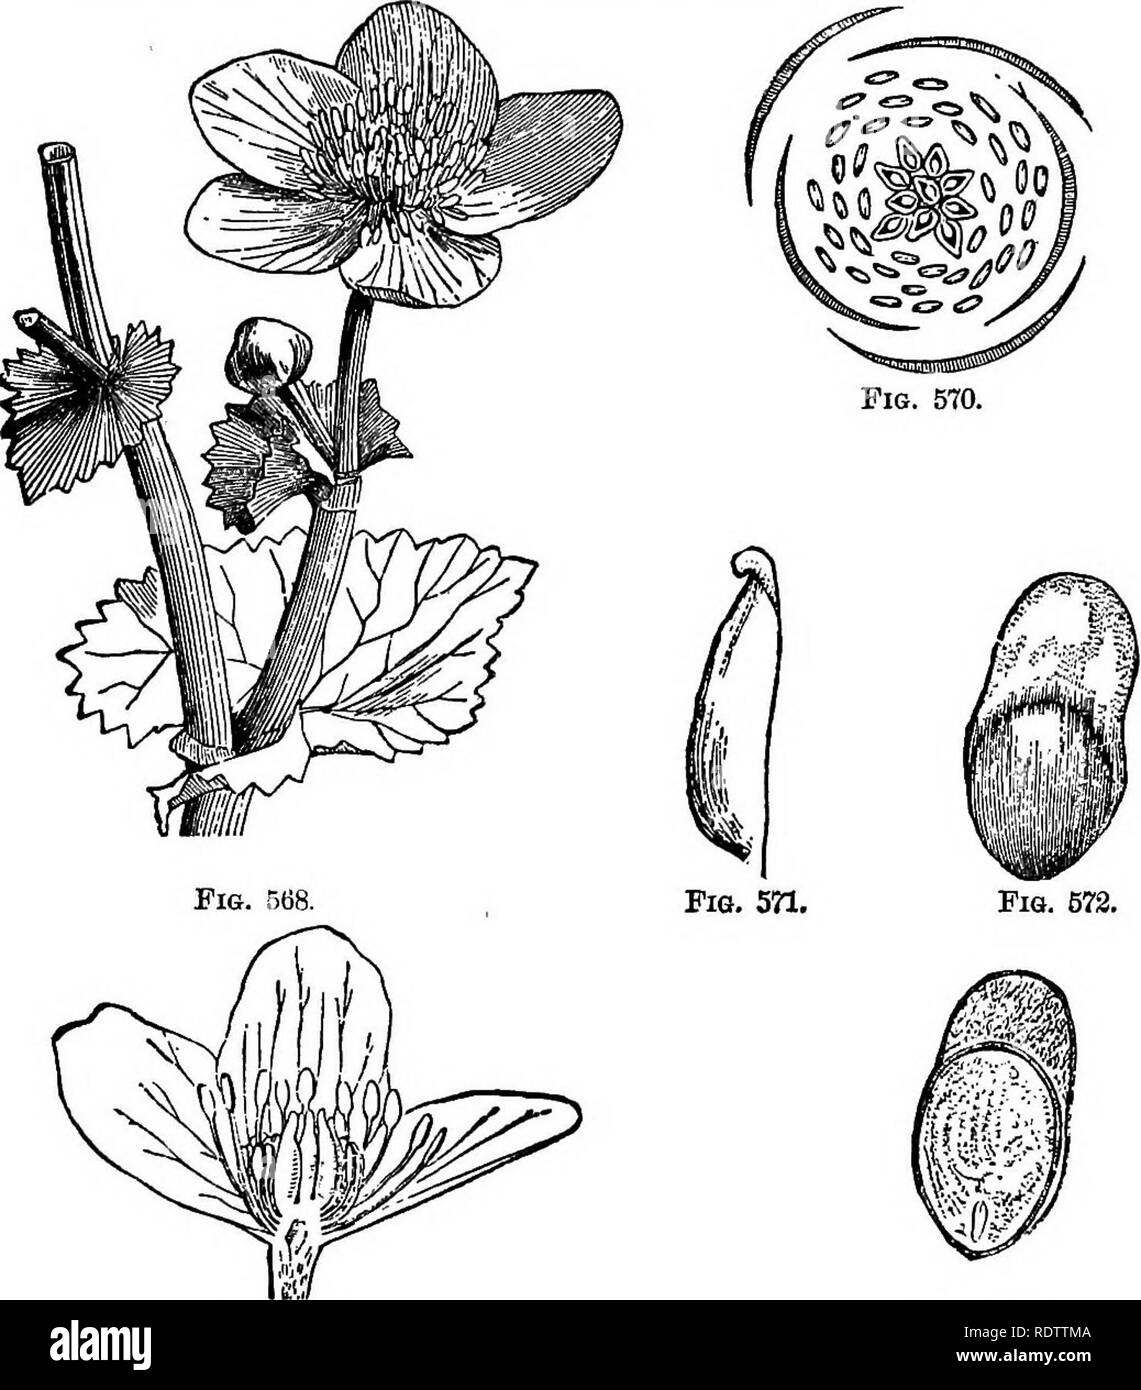 . Botany for high schools and colleges. Botany. UANALES. 563 A. ferox, of upper India, aupplies the people of that region with a virulent poison, with which they poison their arrows. Selleborus niger. Black Hellebore, S. fmtidus, Stinking Hellebore, FiQB. 568-73.—iLi-usTBiTioHS OF EANTJUoniAOBiB (.CcUiha palustris).. Fig. B69. Fig. 568.—Flowering; stem. Fig. 570.—Flower diagram. Pig. 572.-Seed. Magnified. PiQ. 573. Fig. 569.—Vertical section of flower. Fig. 671 .-Young carpel. Maeuified. Fig. 673.—Section of seed. Magnified. and M. viridis, Green Hellebore, all natives of Europe, furnish drast Stock Photo